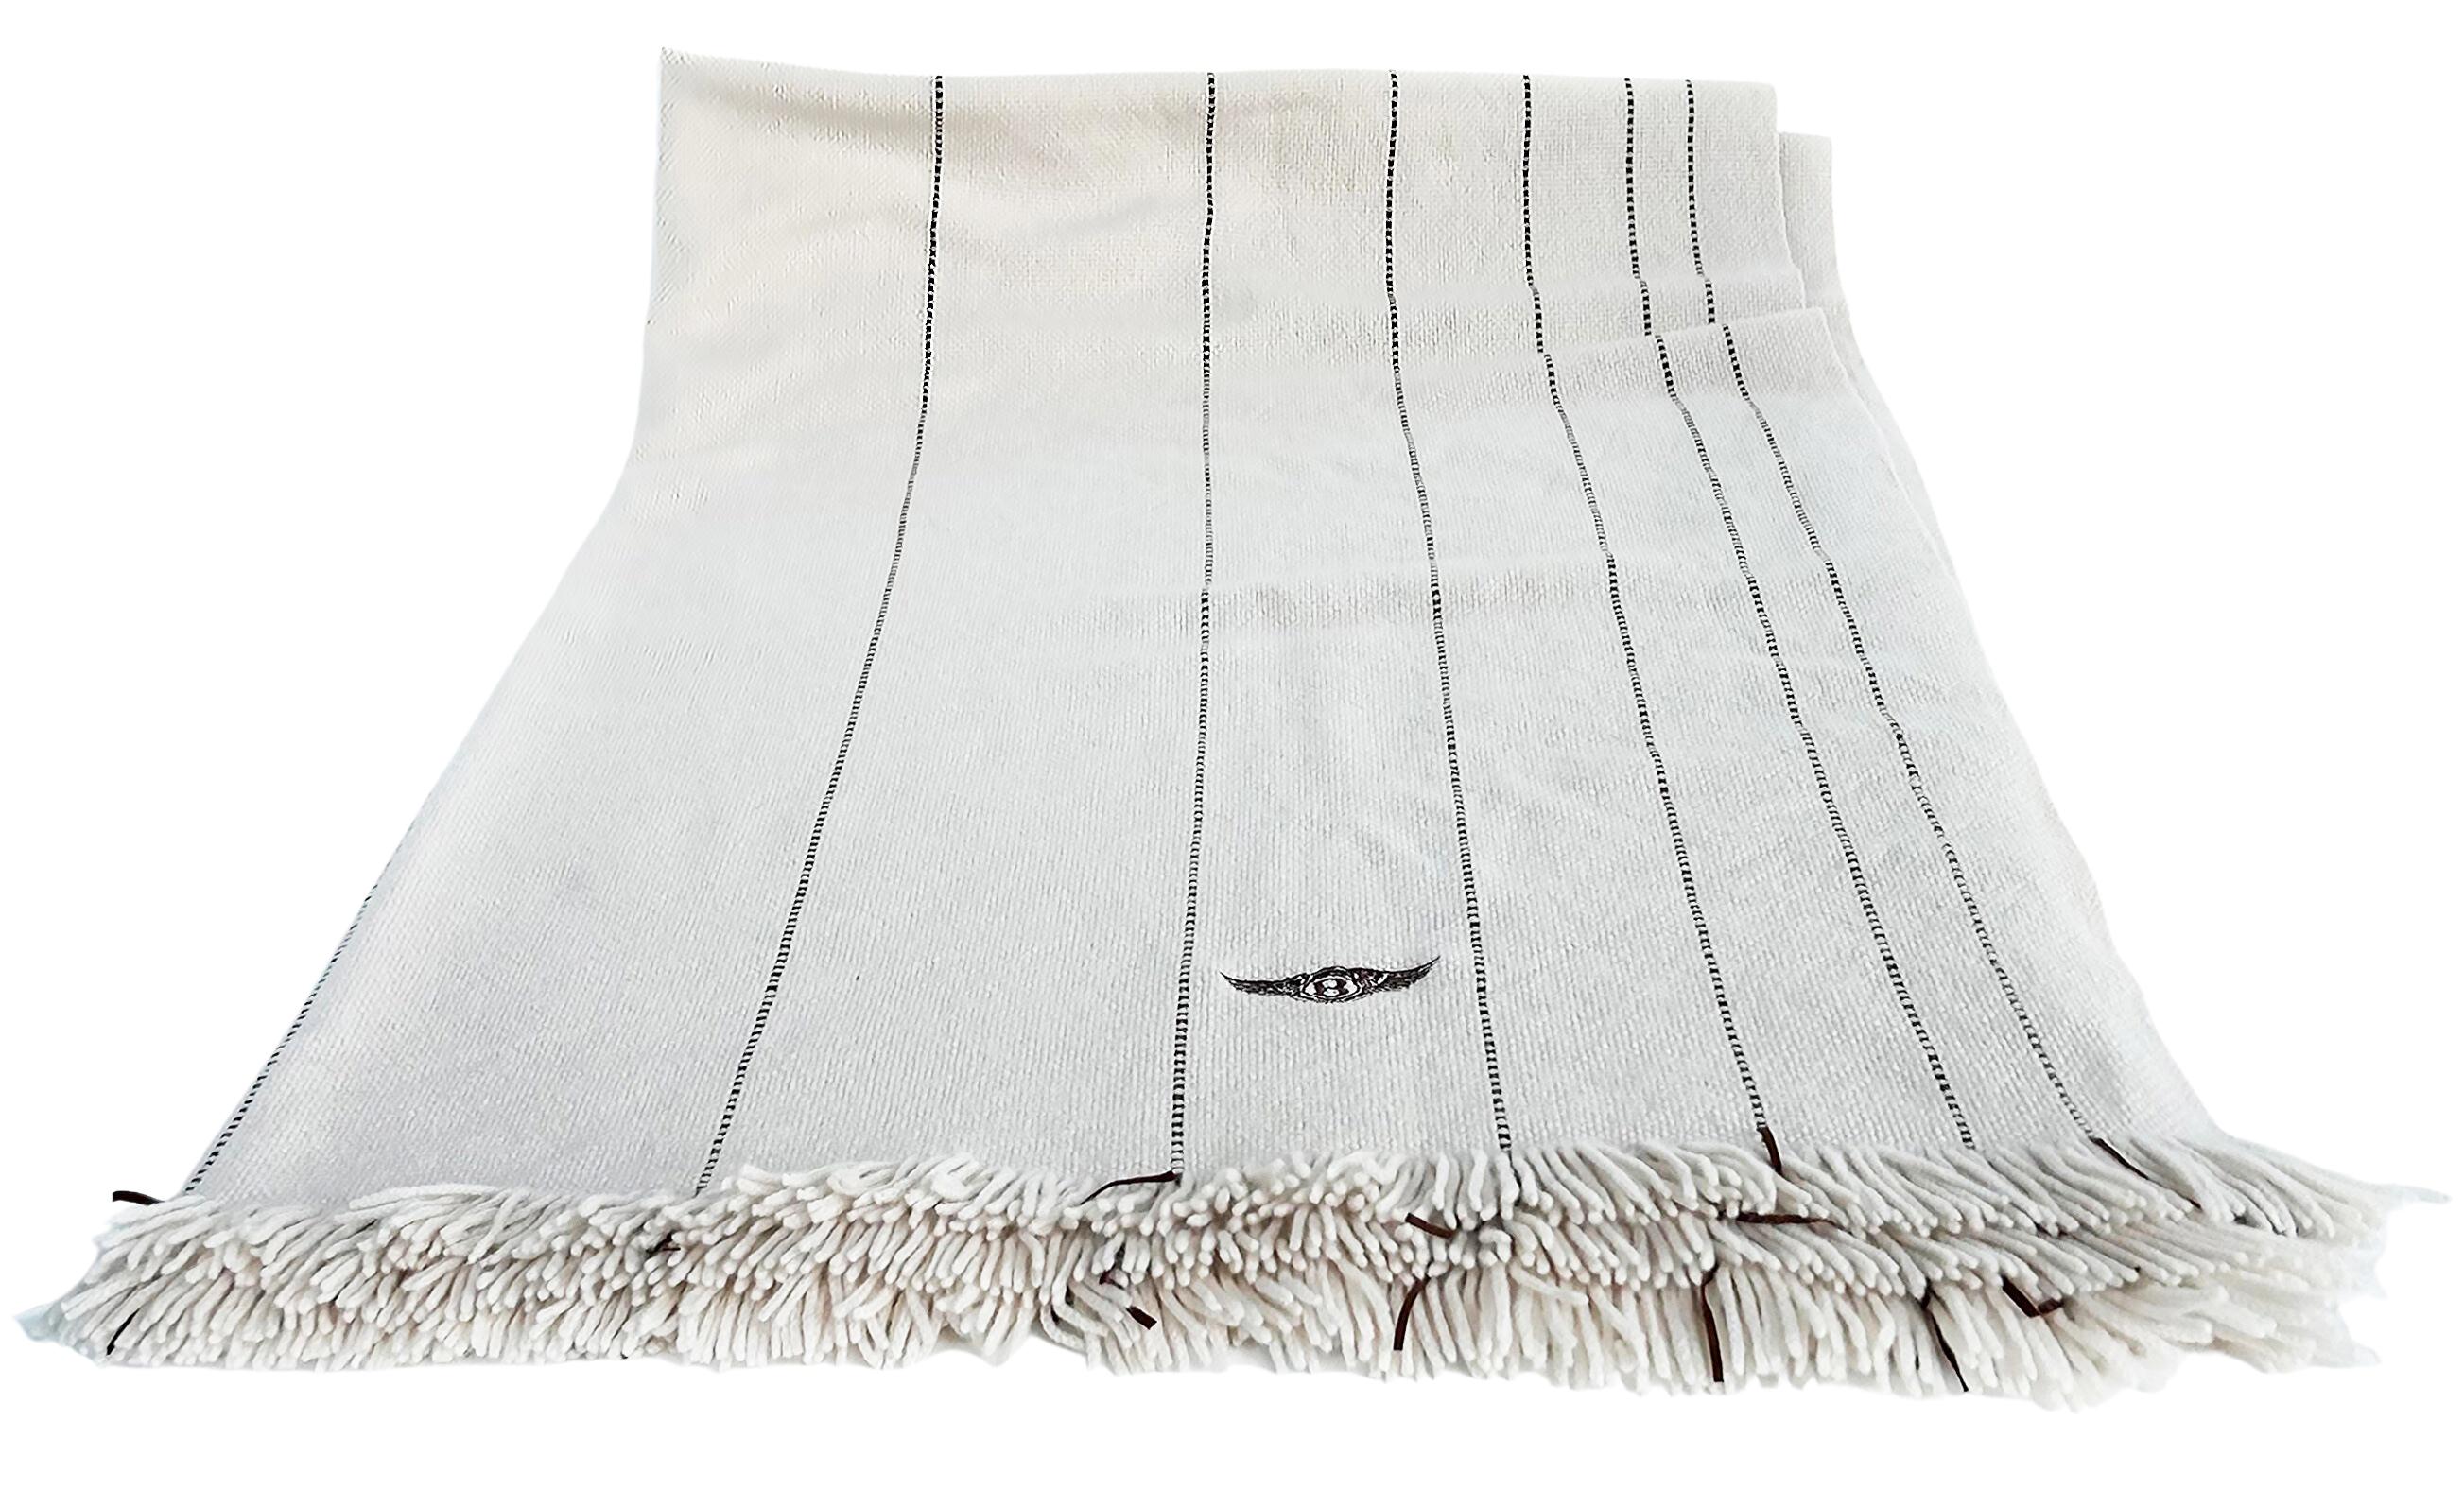 Bentley Home England Loro Piana Italy Cashmere Throw with Fringe

Offered for sale from Bentley Home is a Loro Piana cognac cashmere throw with fringe embroidered with the Bentley logo. The throw is from the Italian luxury cashmere fashion house